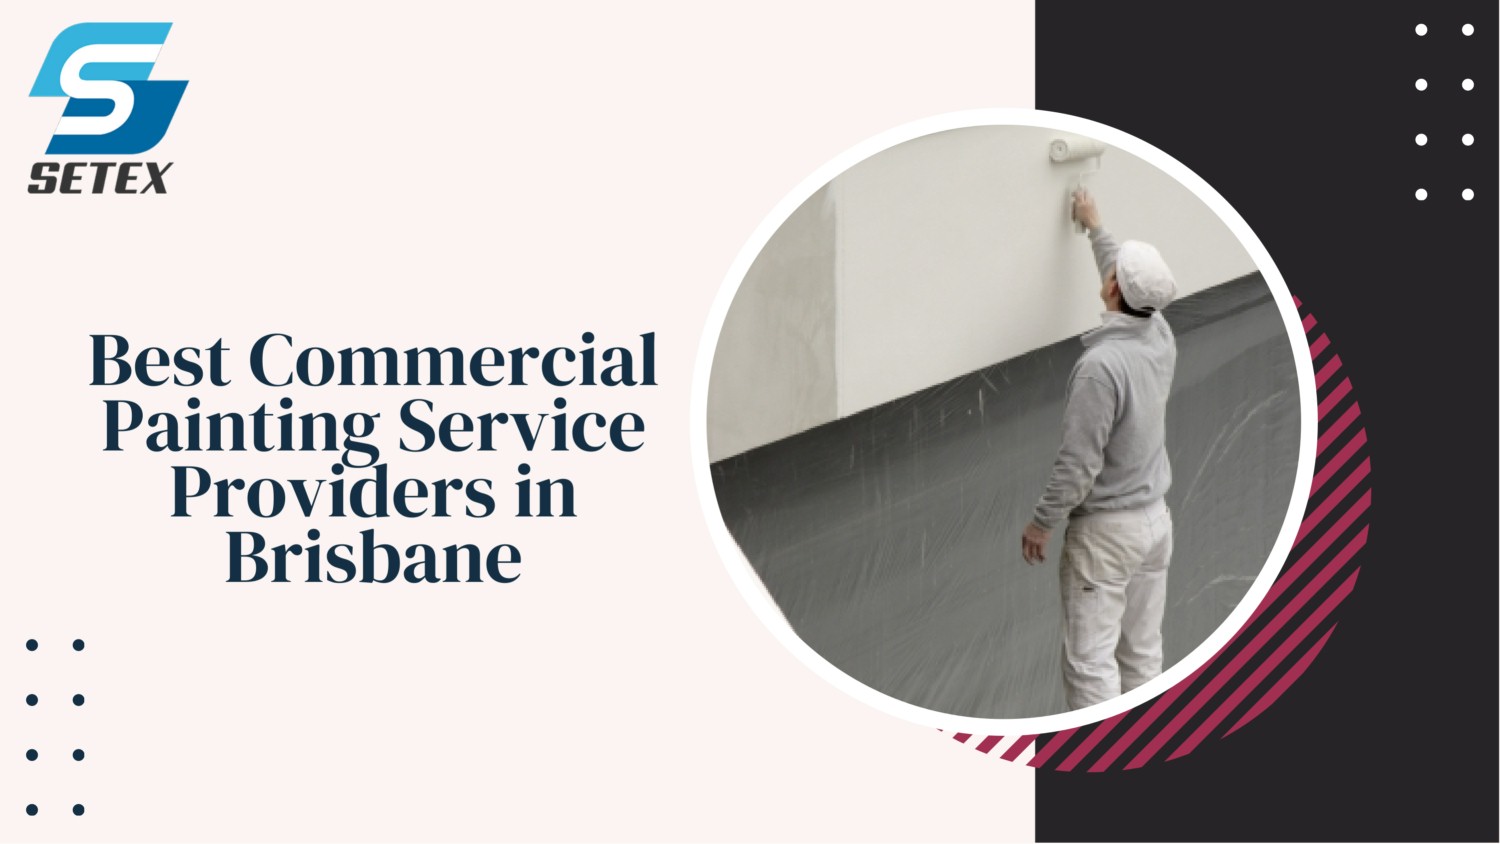 Best Commercial Painting Service Providers in Brisbane